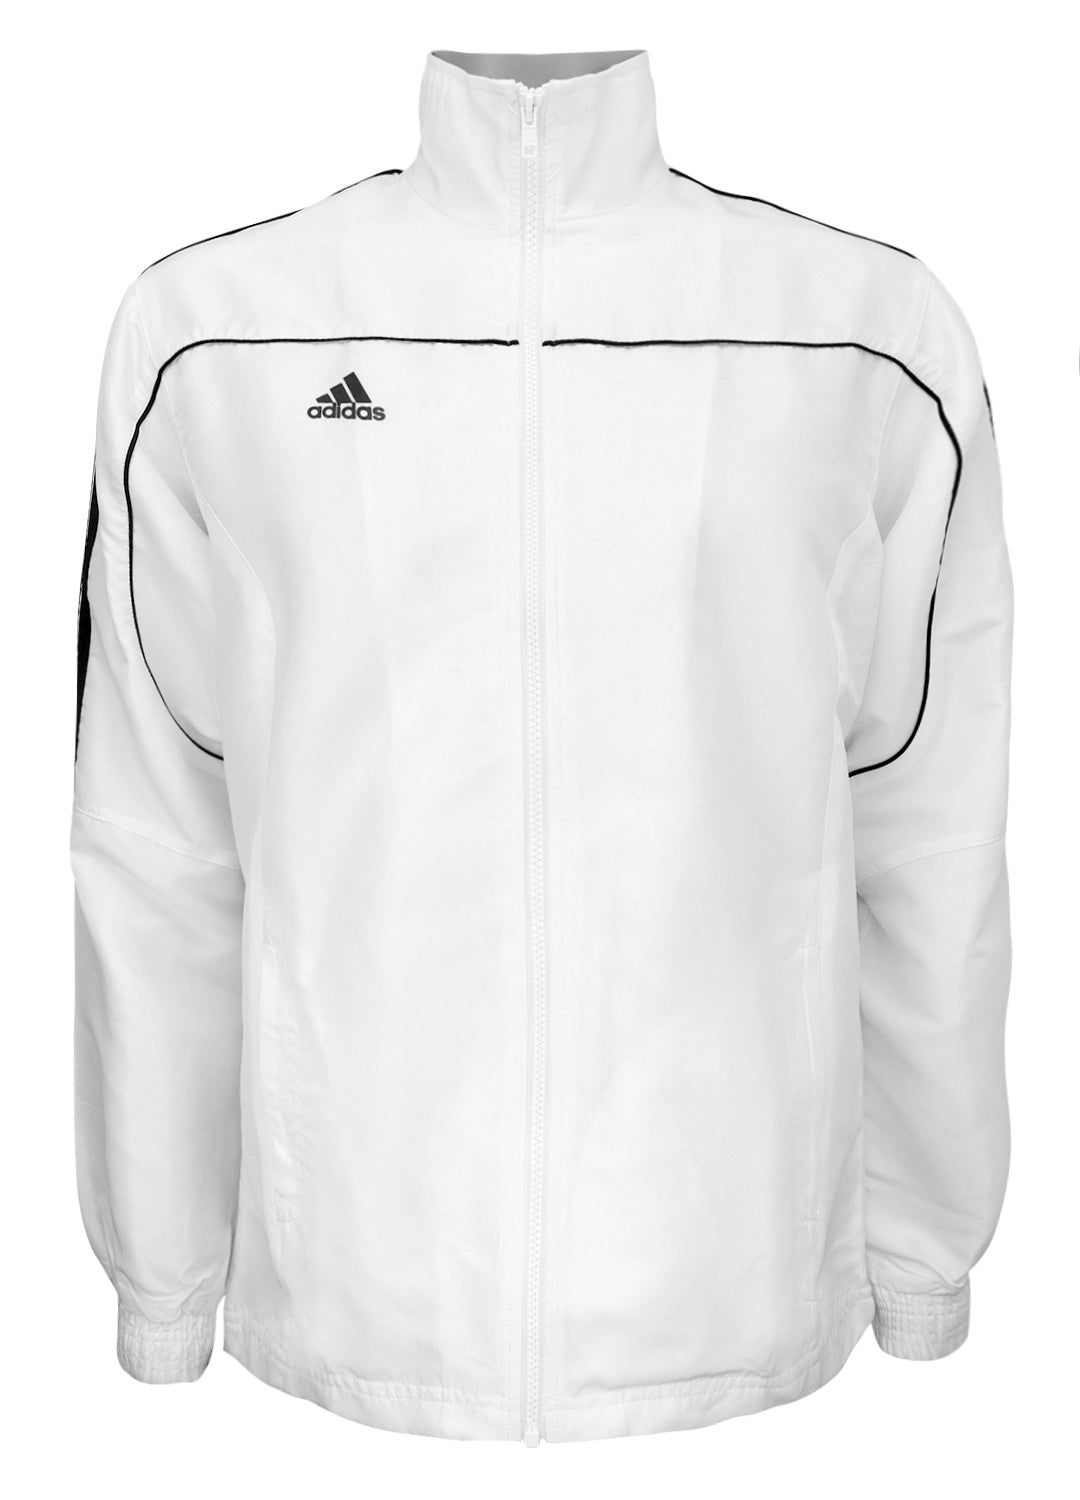 adidas White with Black Stripes Windbreaker Style Team Jacket Front View